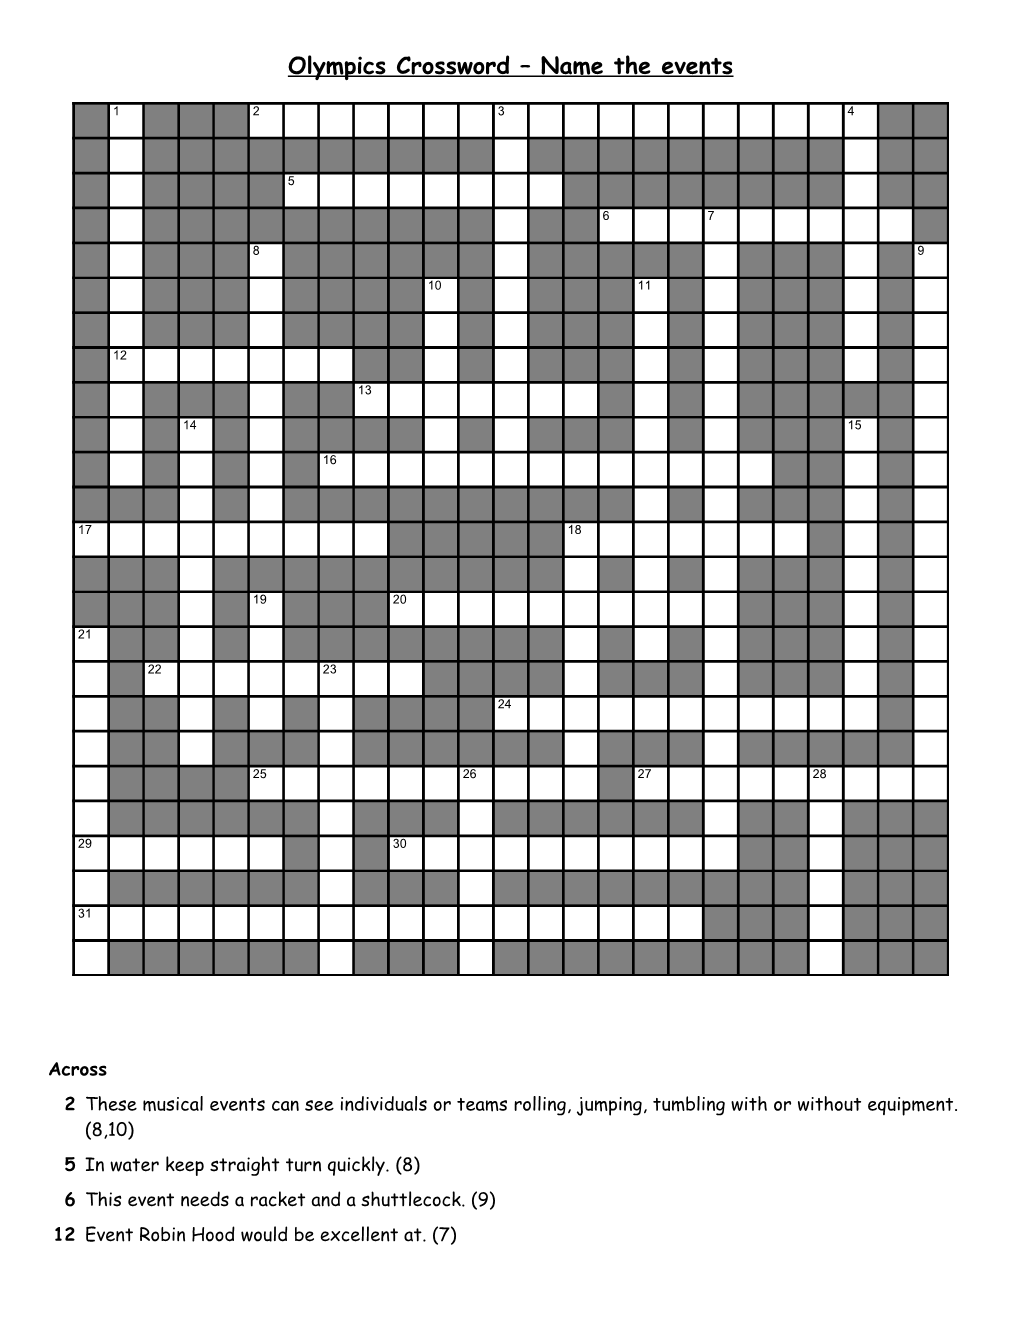 Olympics Crossword Name the Events